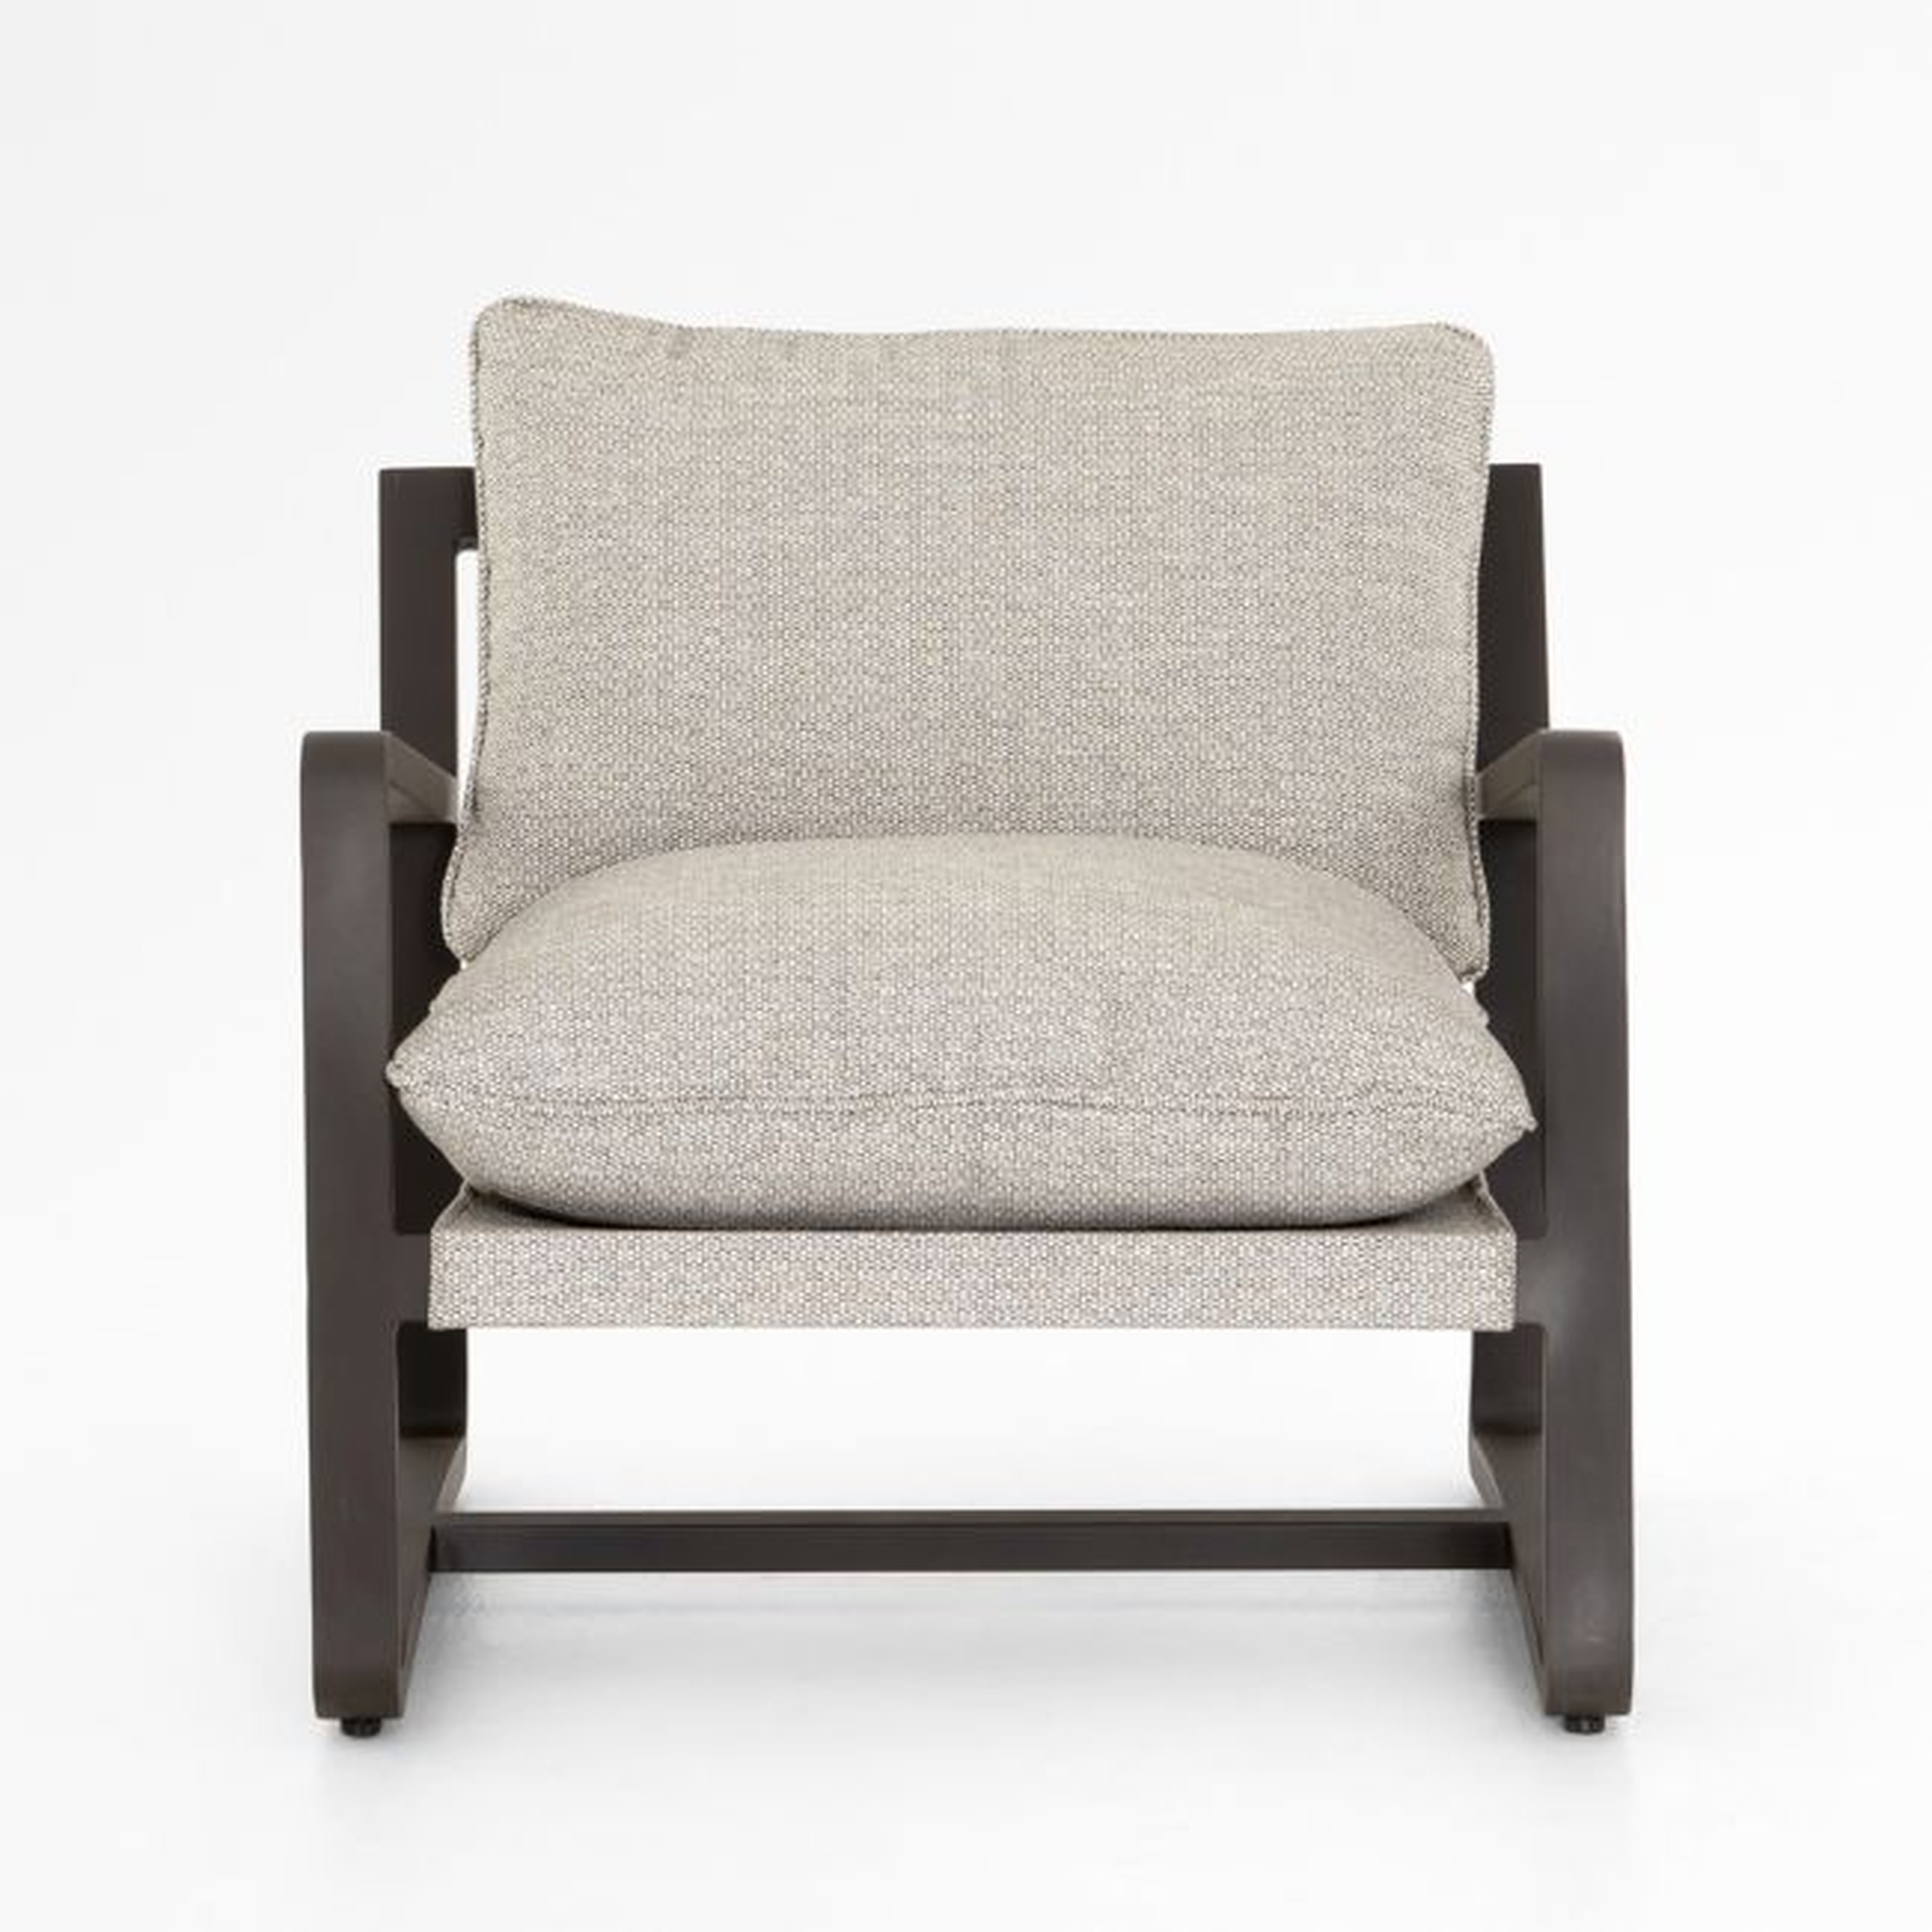 Adelaide Outdoor Lounge Chair - Crate and Barrel